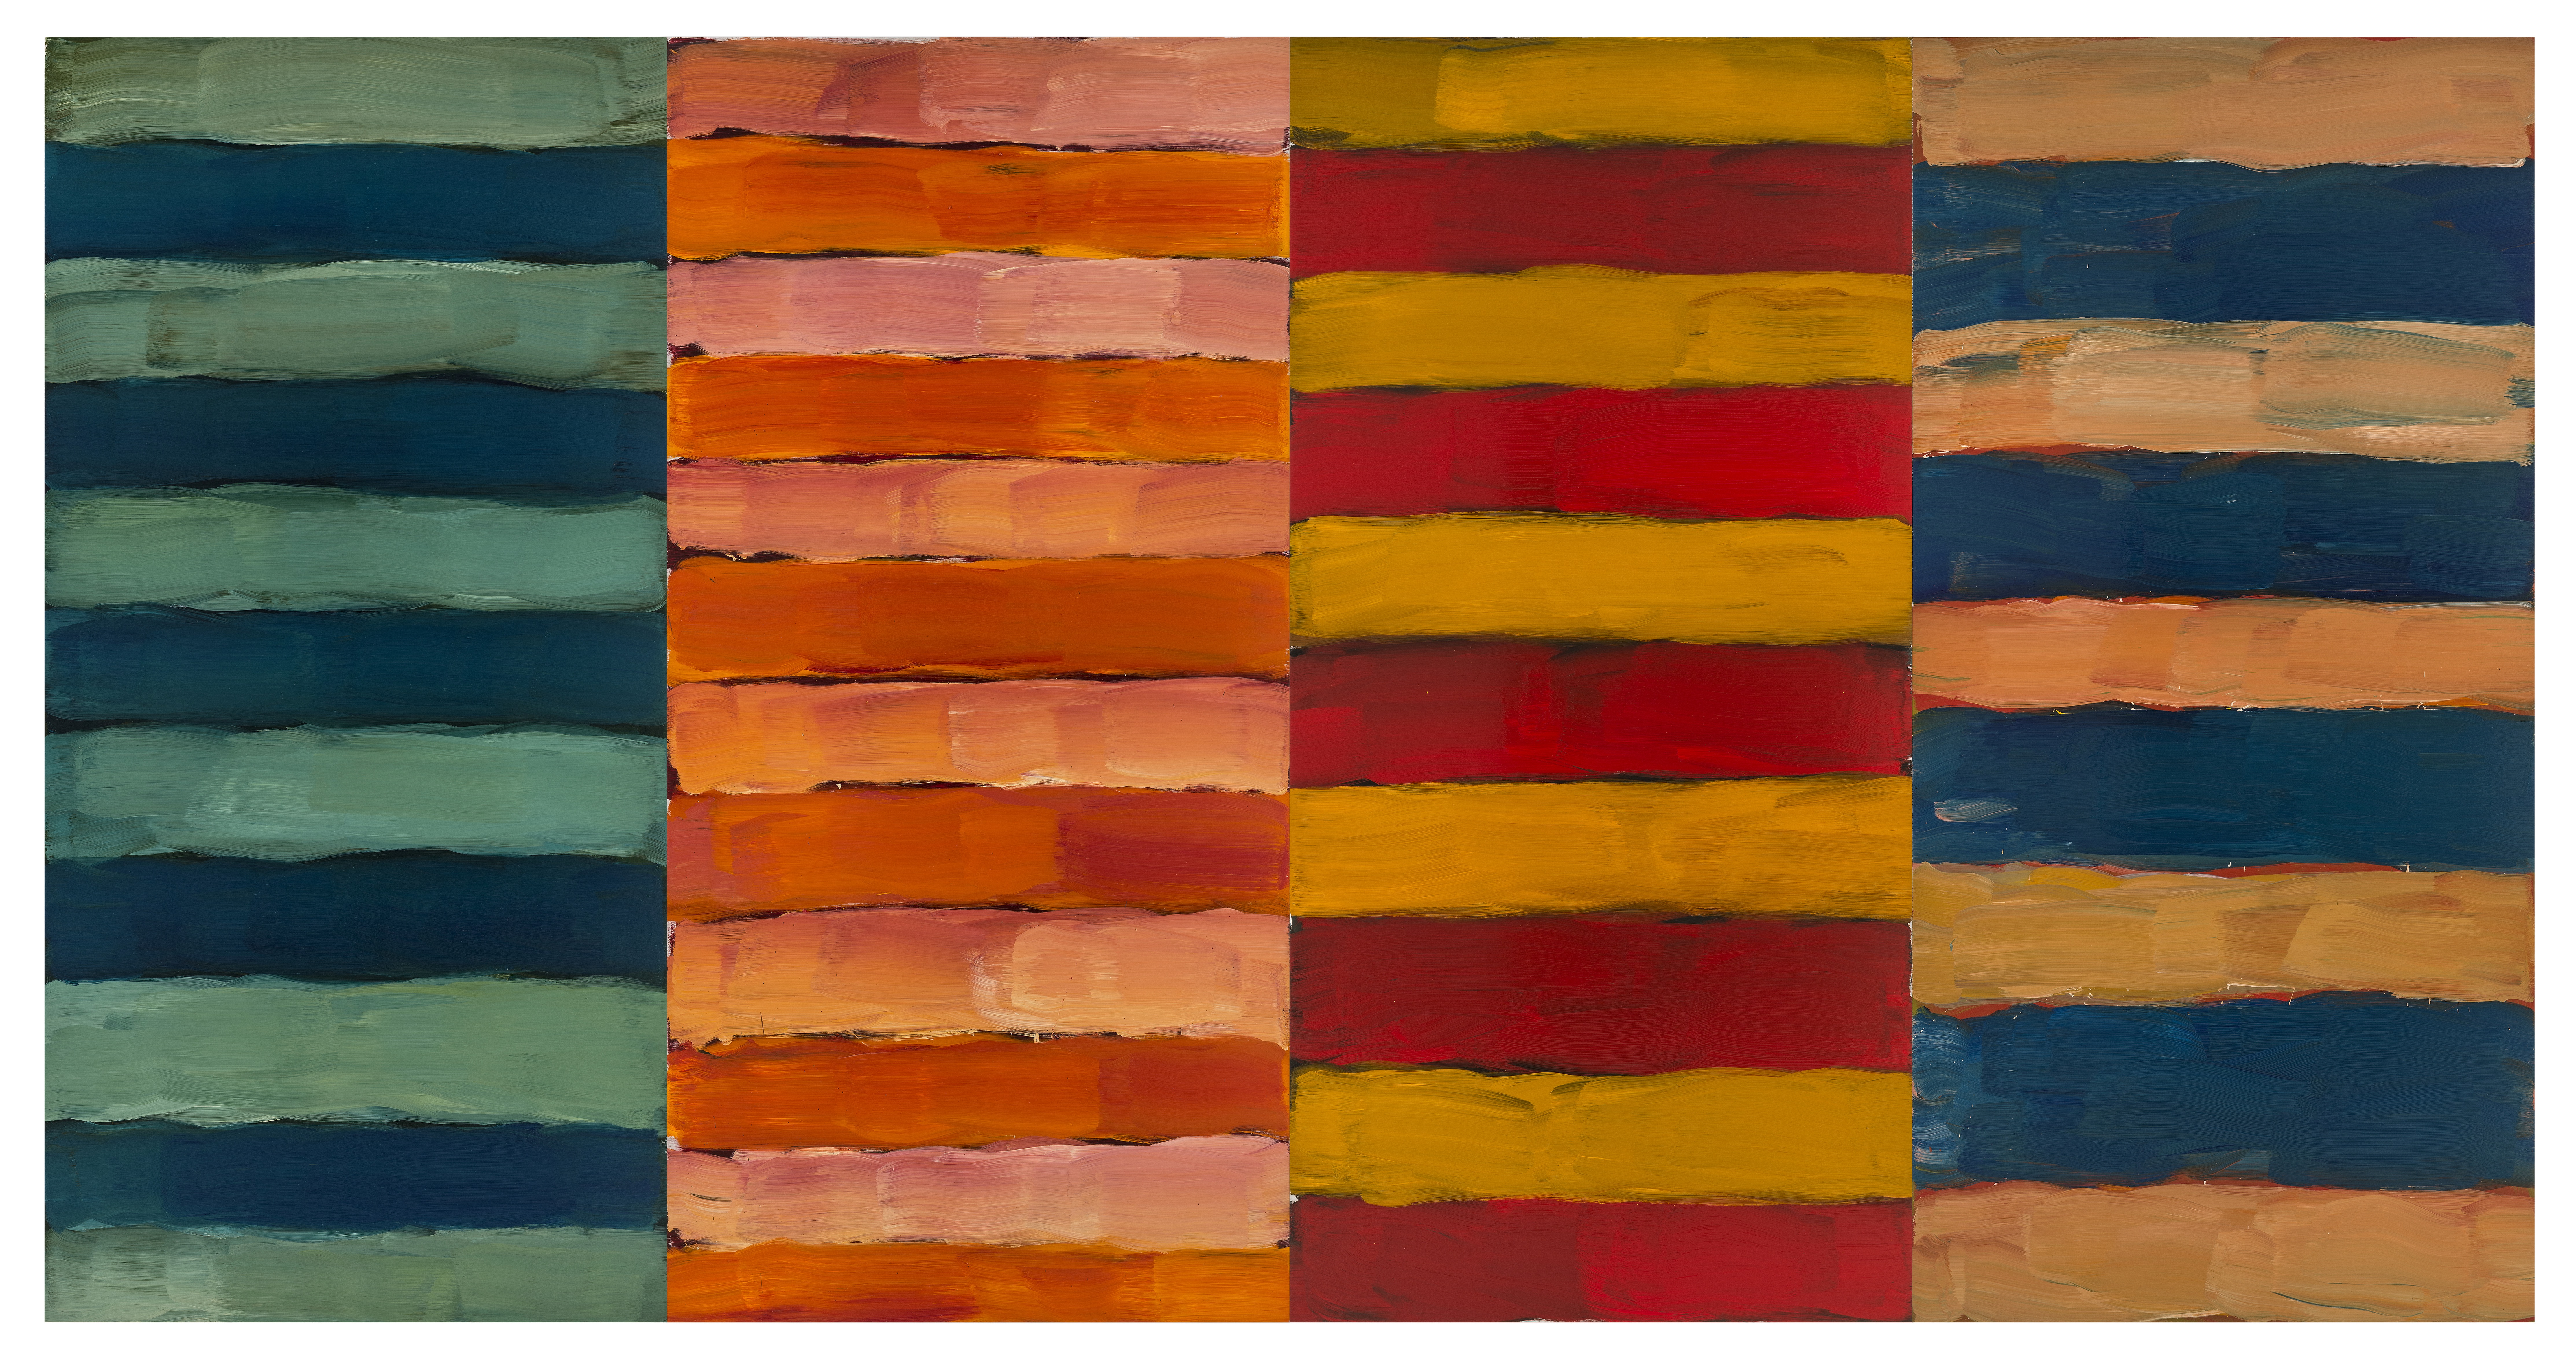 Image: Sean Scully, Four Days, 2015. Oil on aluminum, 110 x 213.5”. (279.4 x 542.3 cm). Private collection.